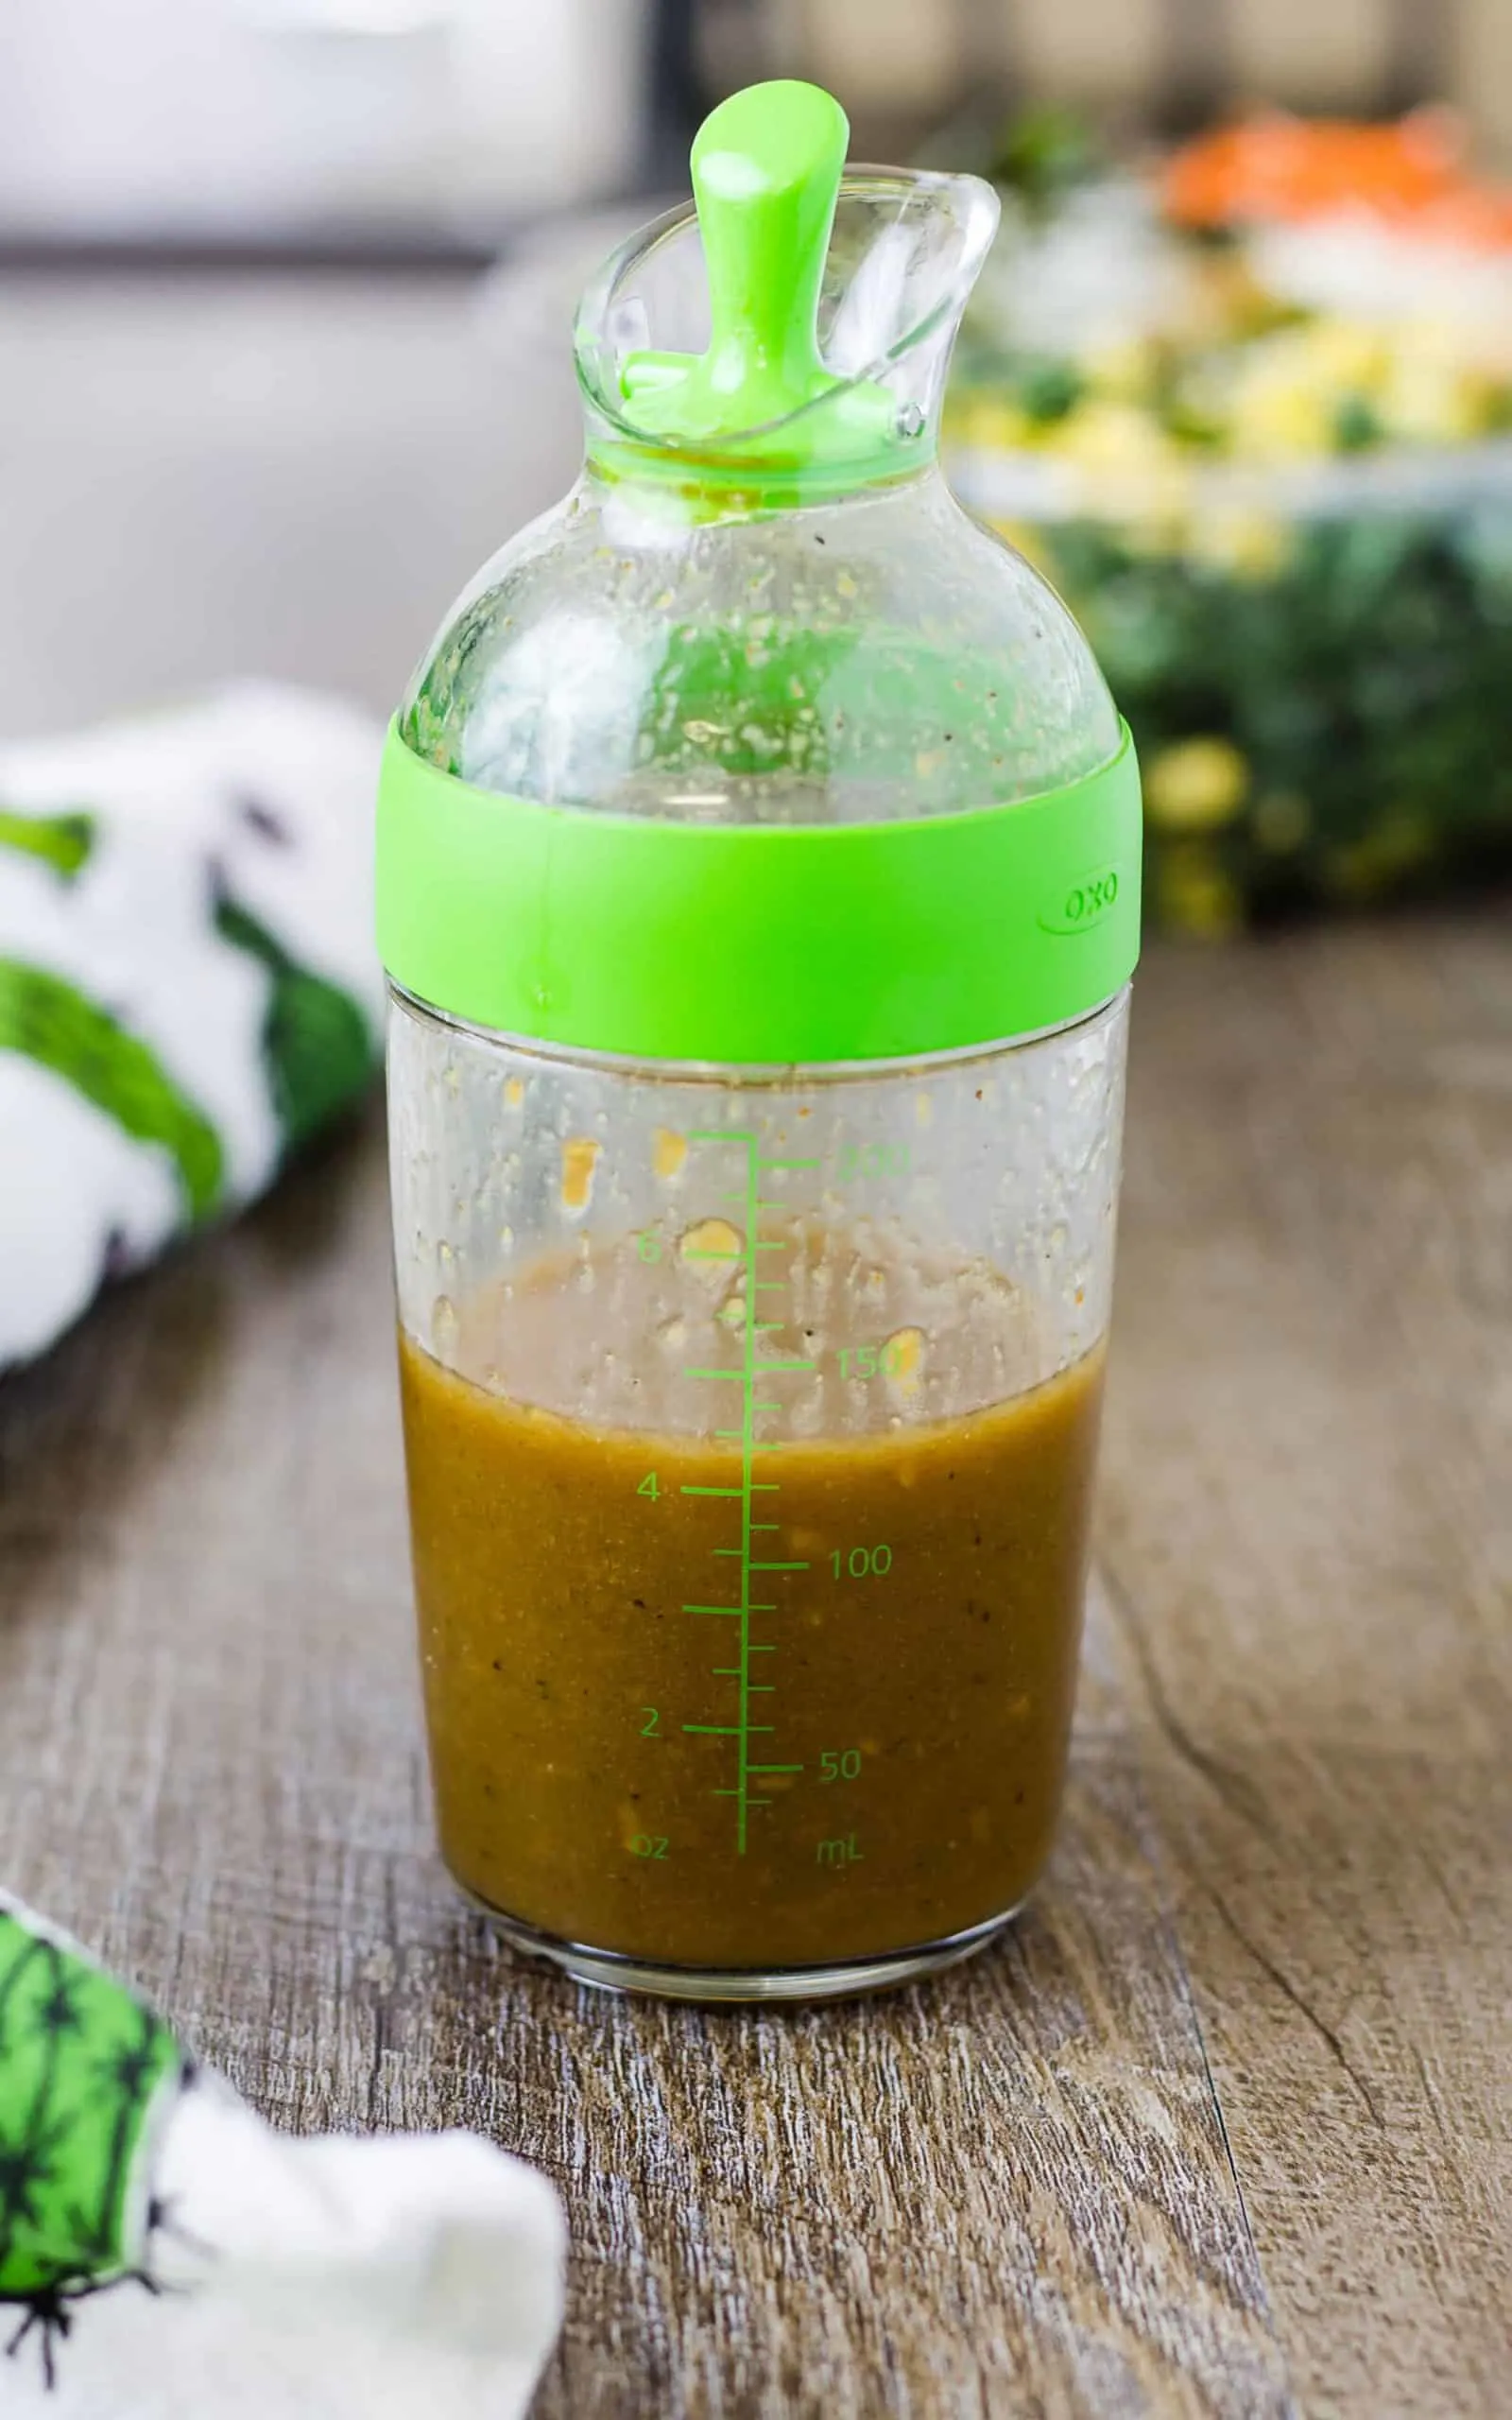 Roasted Ginger Vinaigrette Salad Dressing in a Dressing container on a wood surface